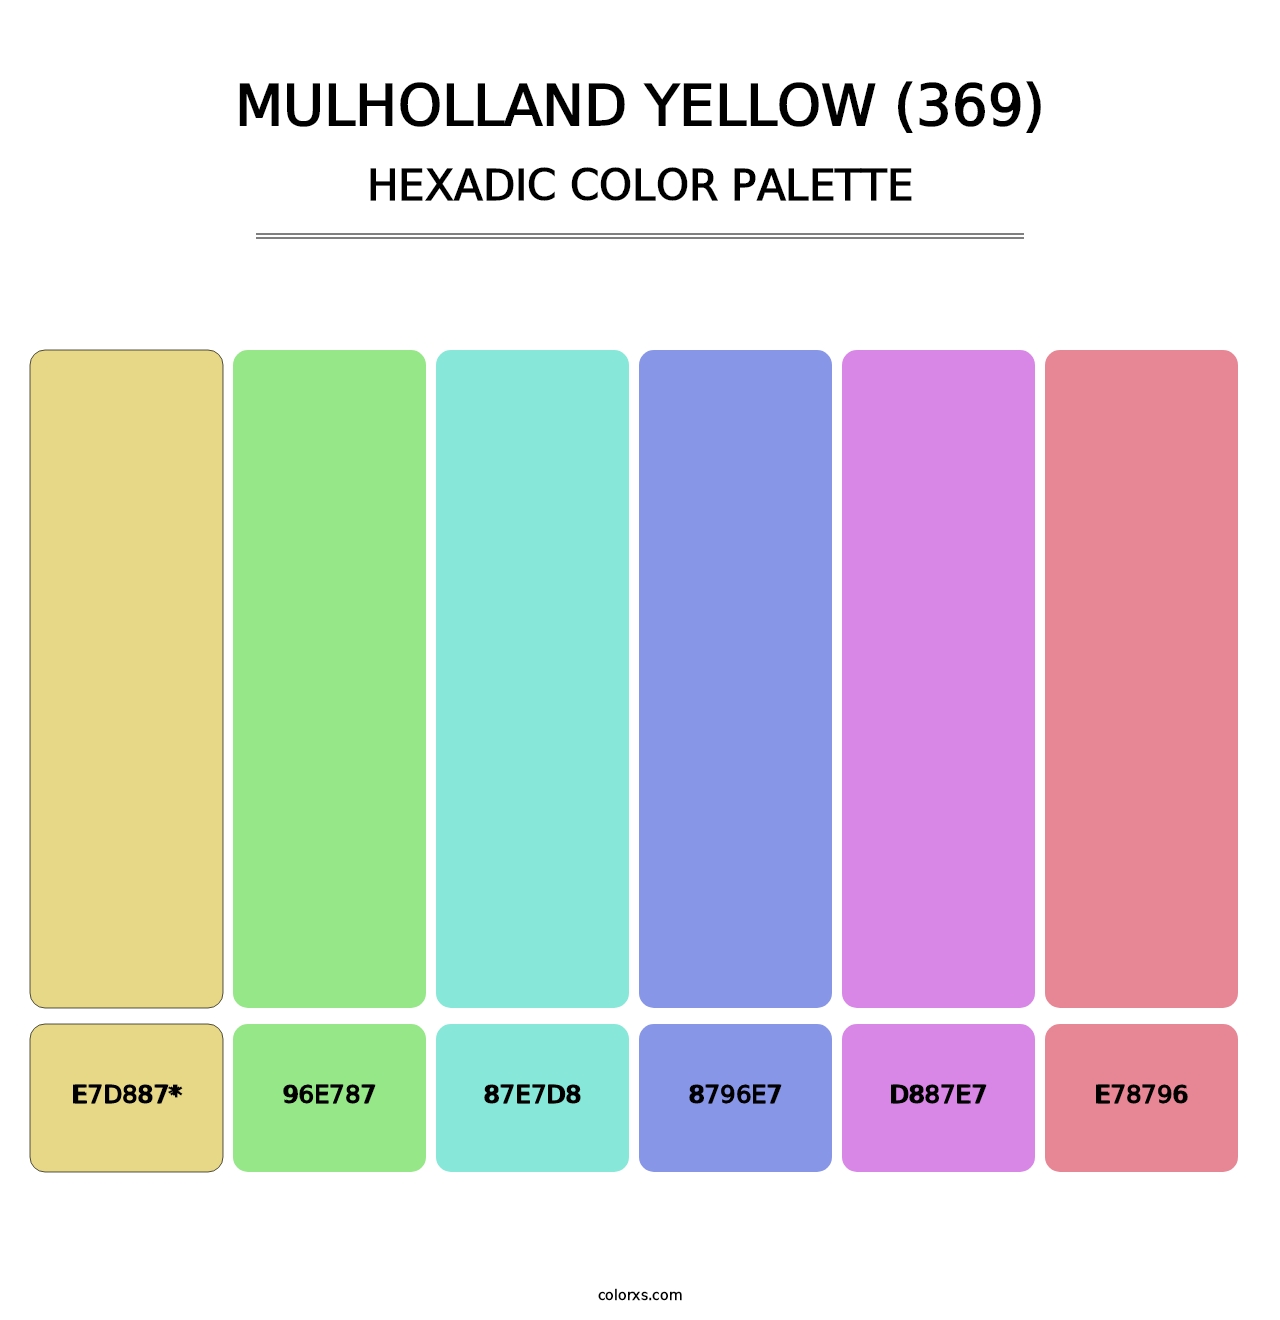 Mulholland Yellow (369) - Hexadic Color Palette